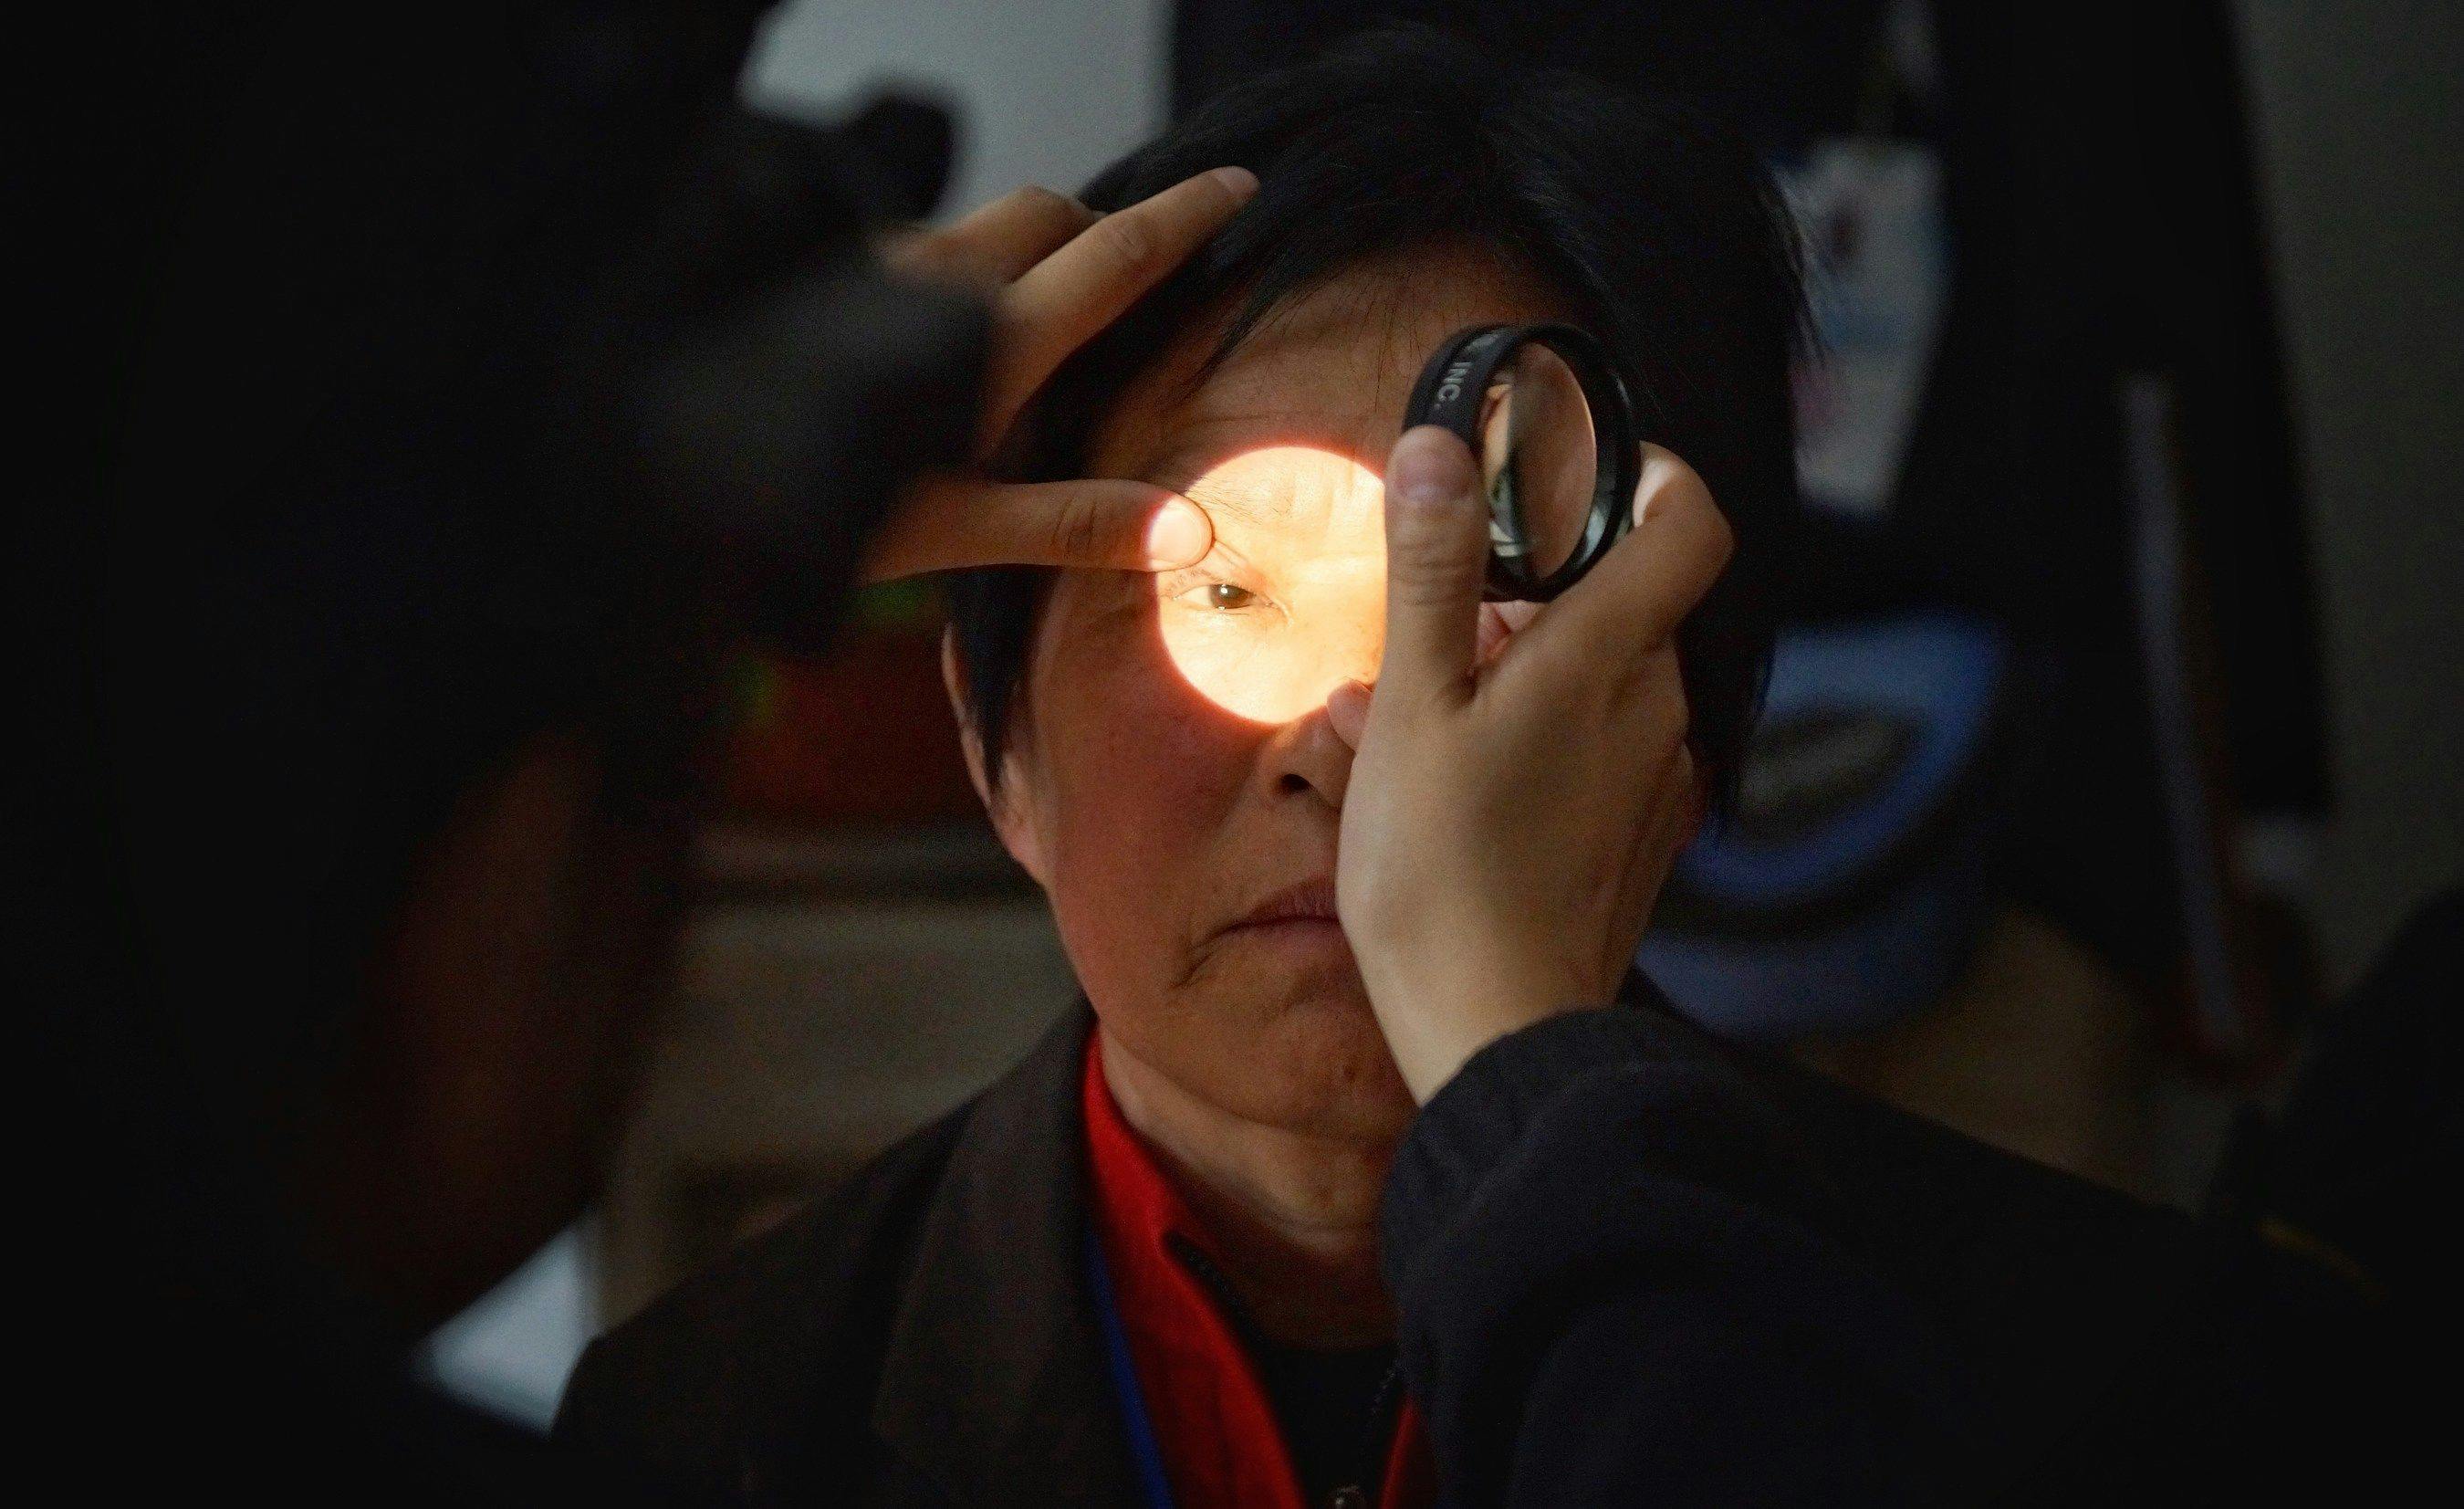 A patient is screened for diabetic retinopathy at a hospital in Jinan, China. (Image courtesy of Geoff Oliver Bugbee)